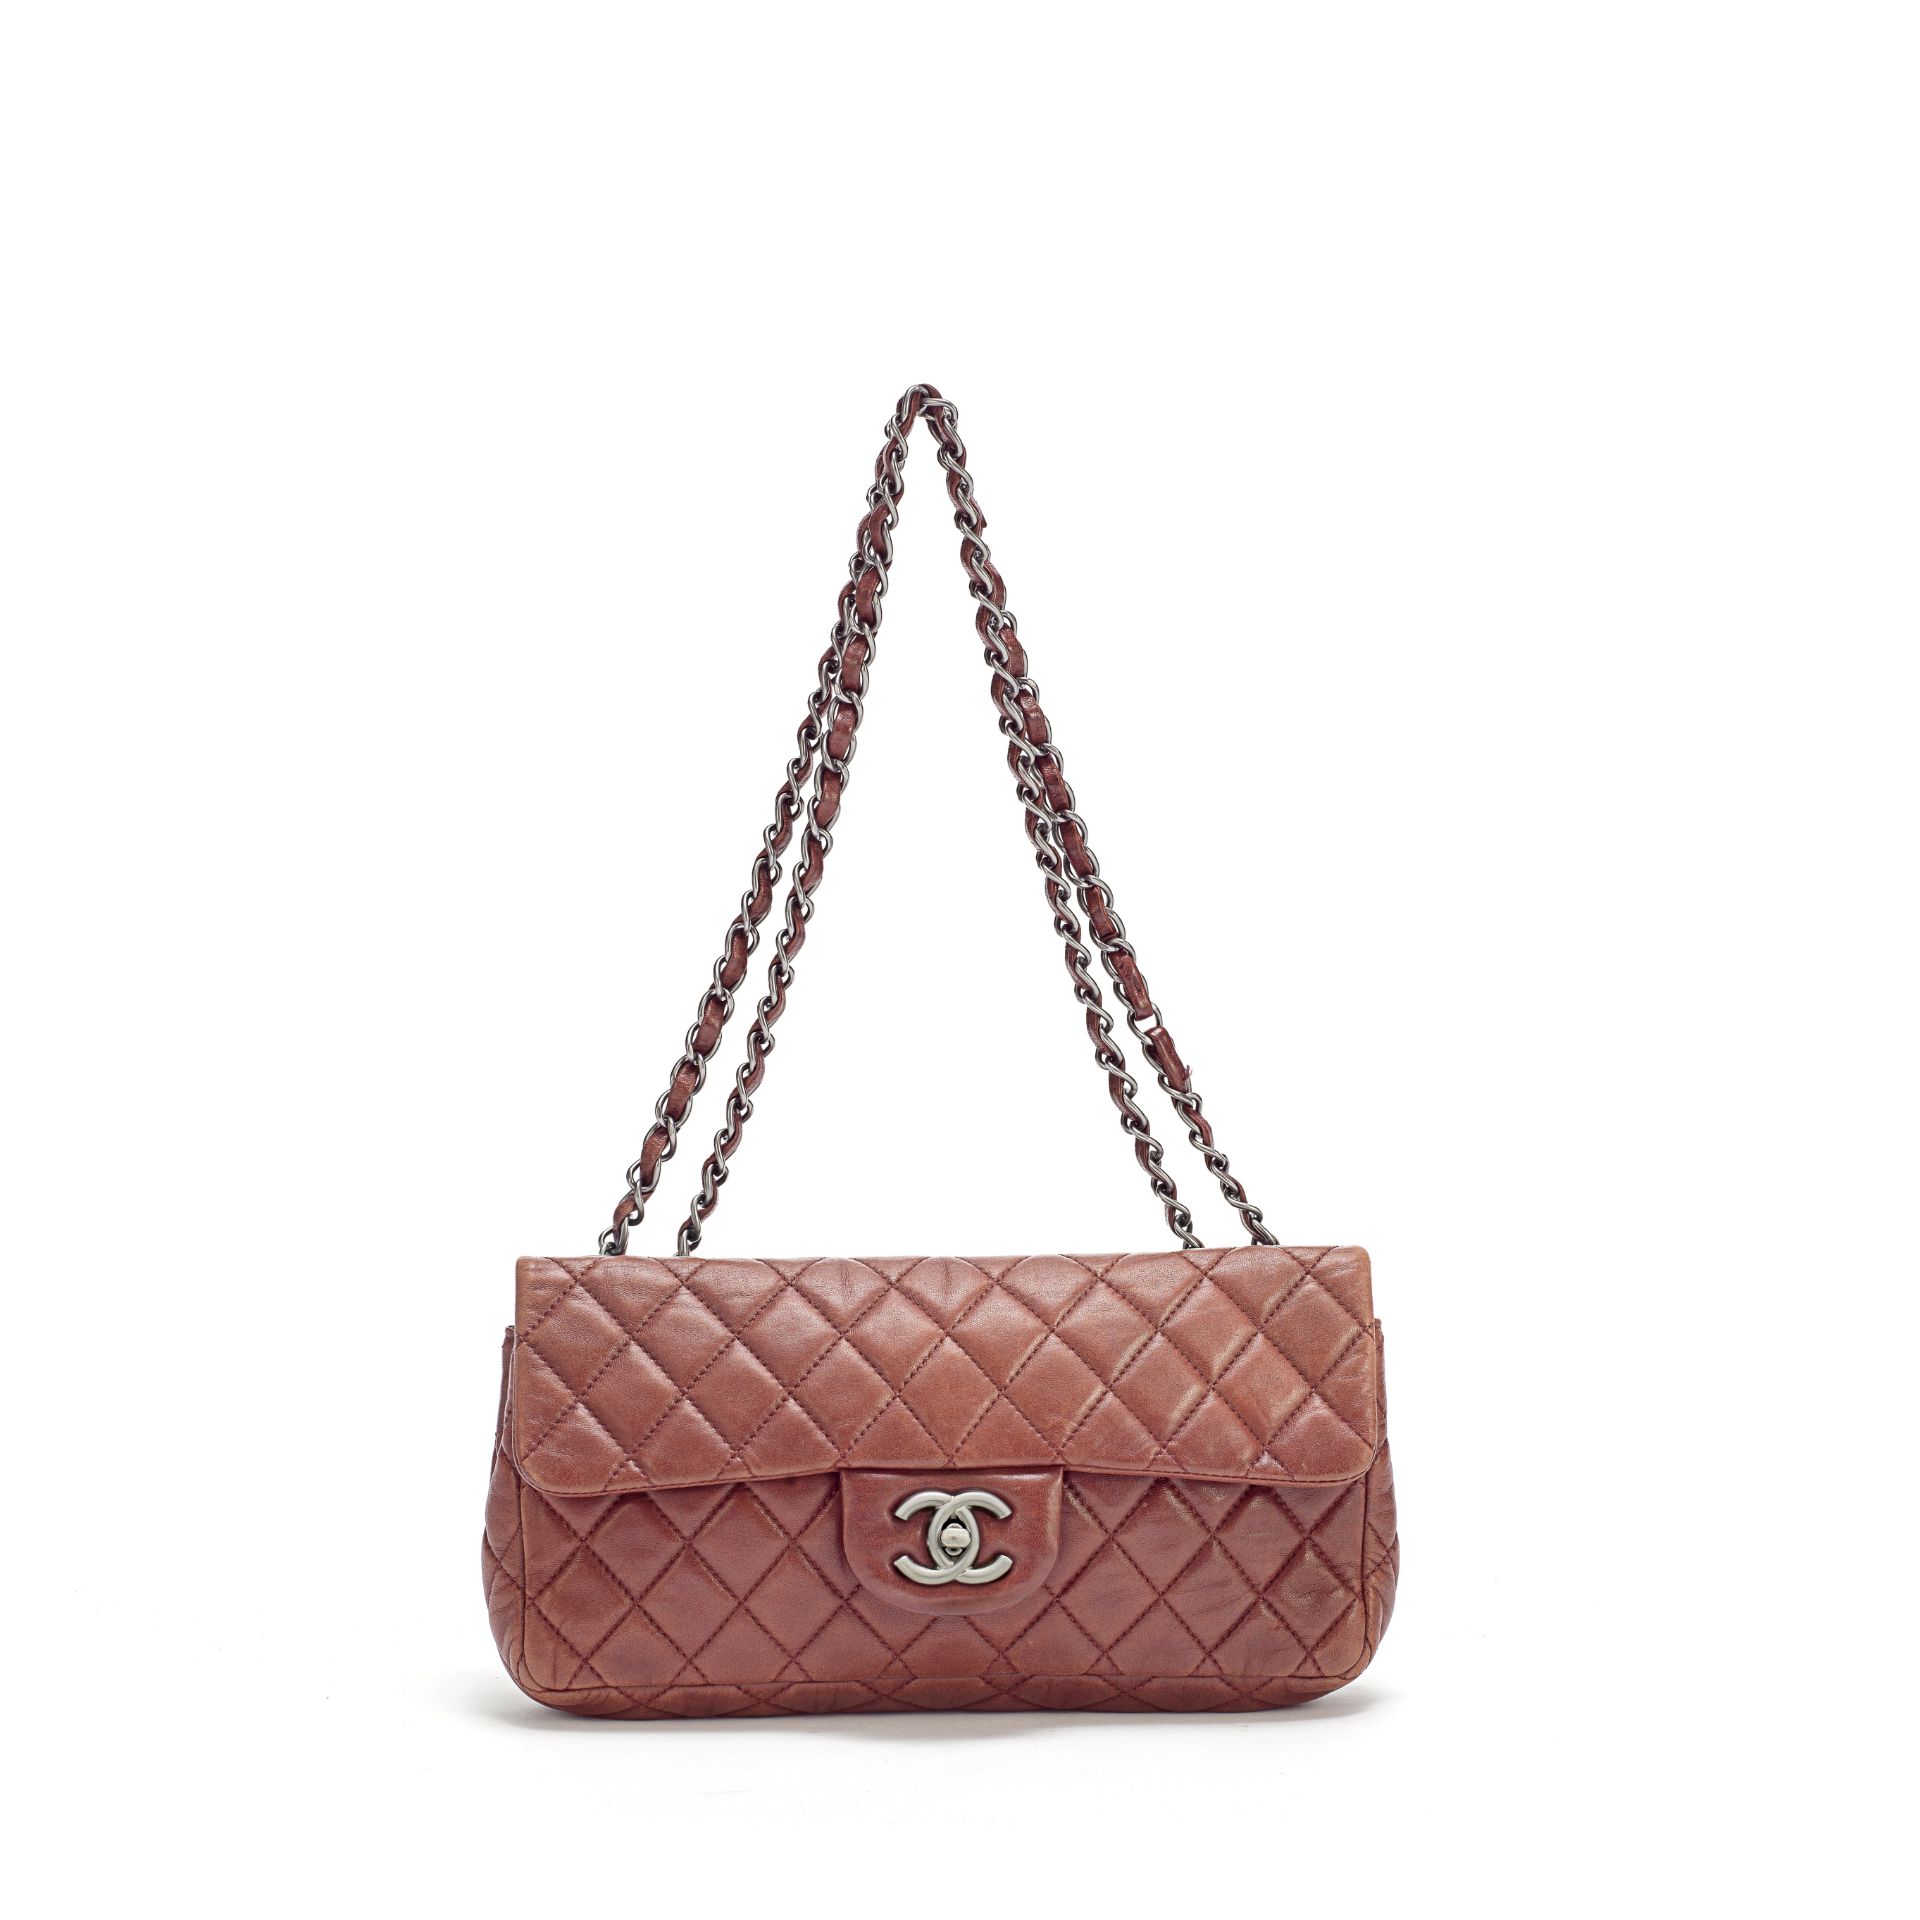 Burgundy East/West Flap Bag, Chanel, c. 2008-09, (Includes serial sticker and dust bag)